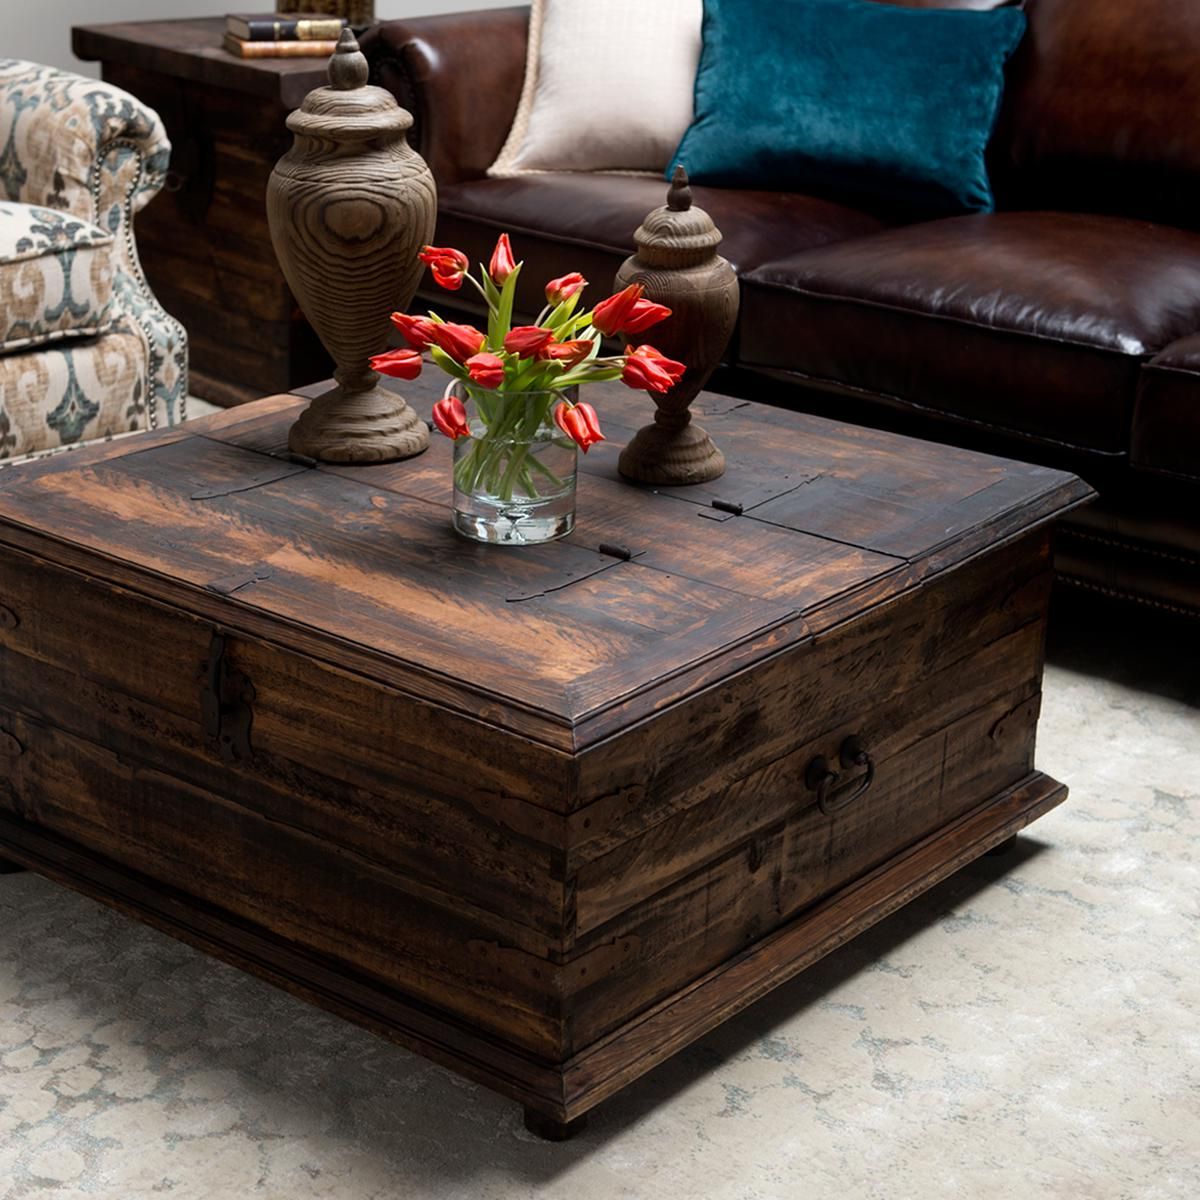 Rustic Wood Coffee Tables Intended For Most Recent Rustic Trunk Coffee Table For Your Living Room – Homes Furniture Ideas (View 11 of 15)